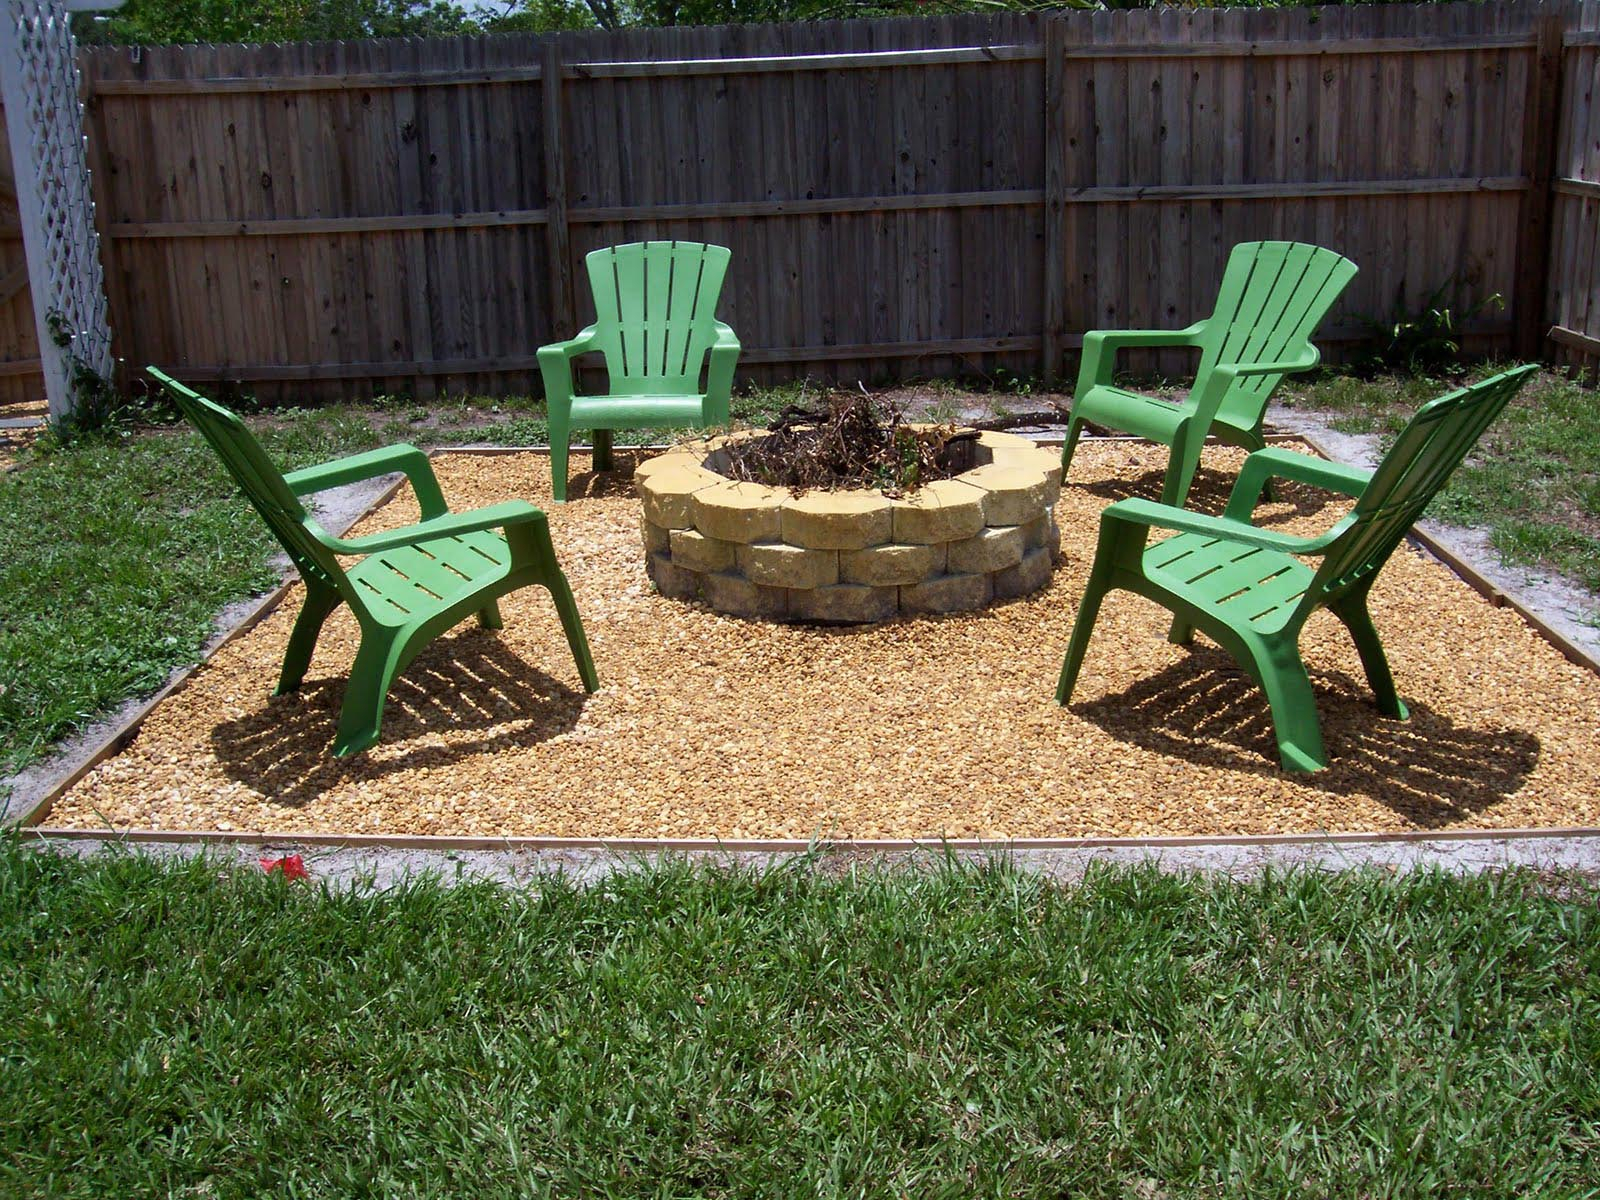 Cool Outdoor Fire Pit Ideas Fire Pit Design Ideas for size 1600 X 1200